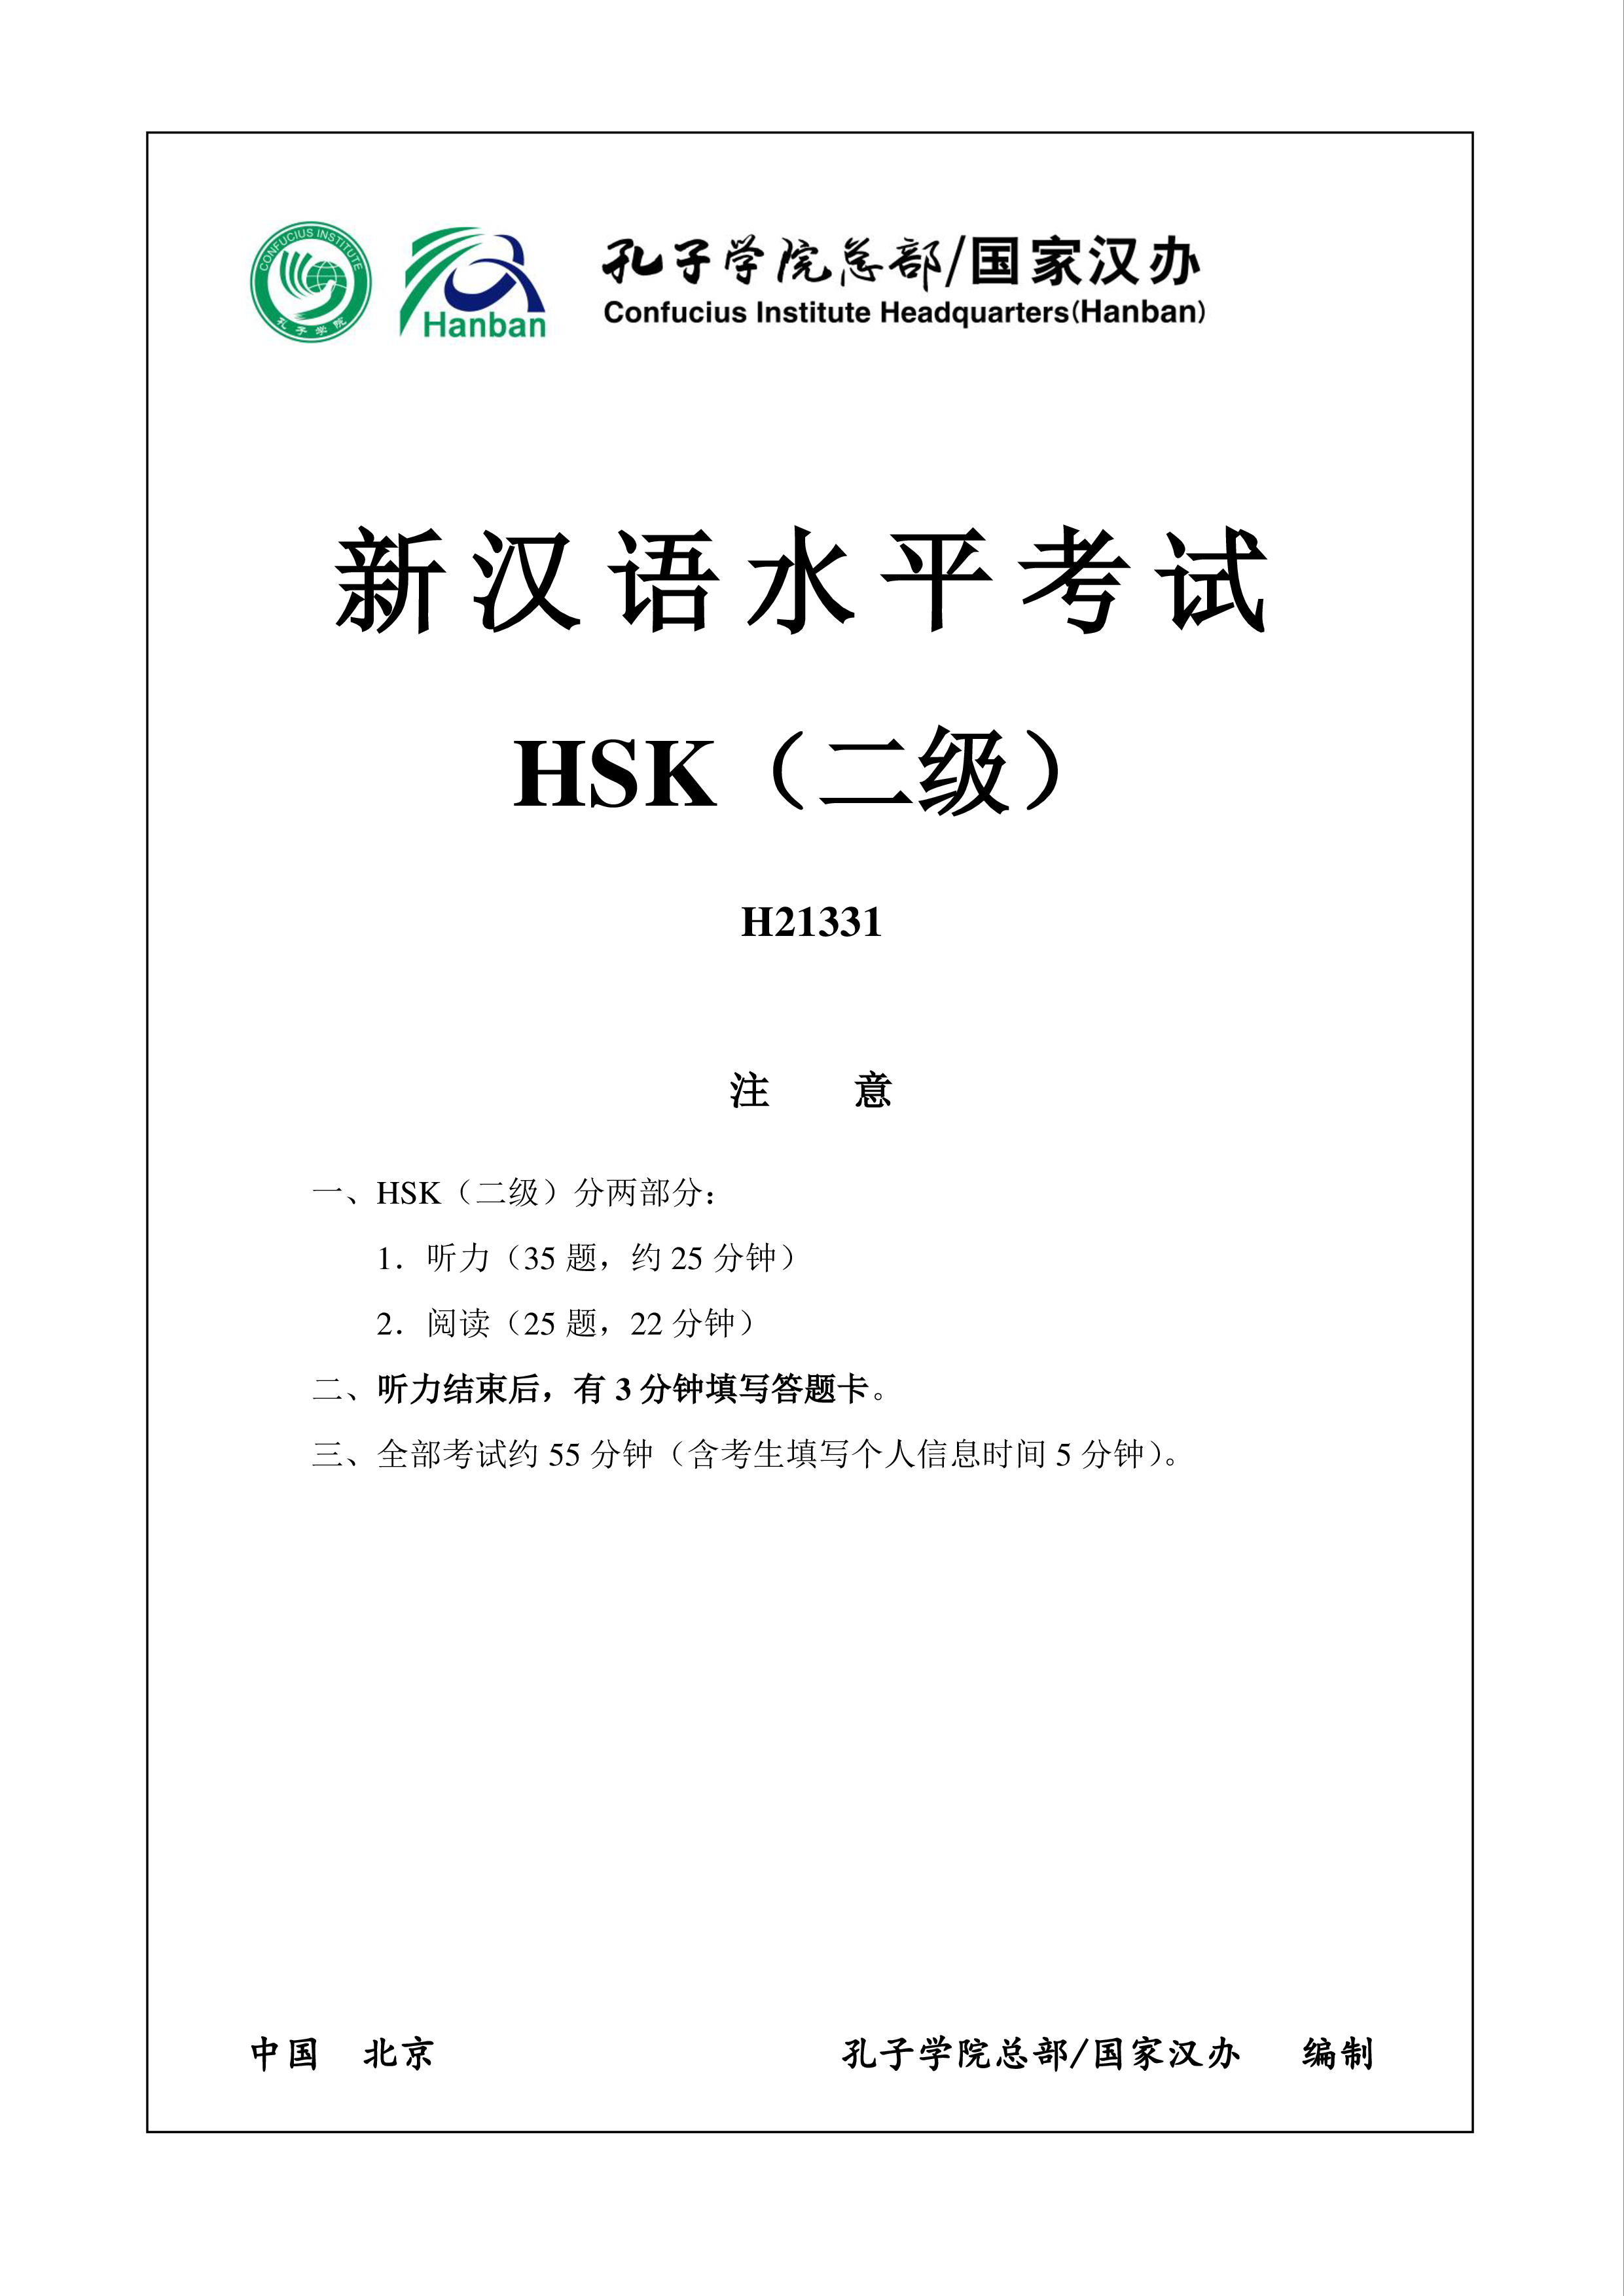 hsk2 chinese exam including answers # hsk2 h21331 template